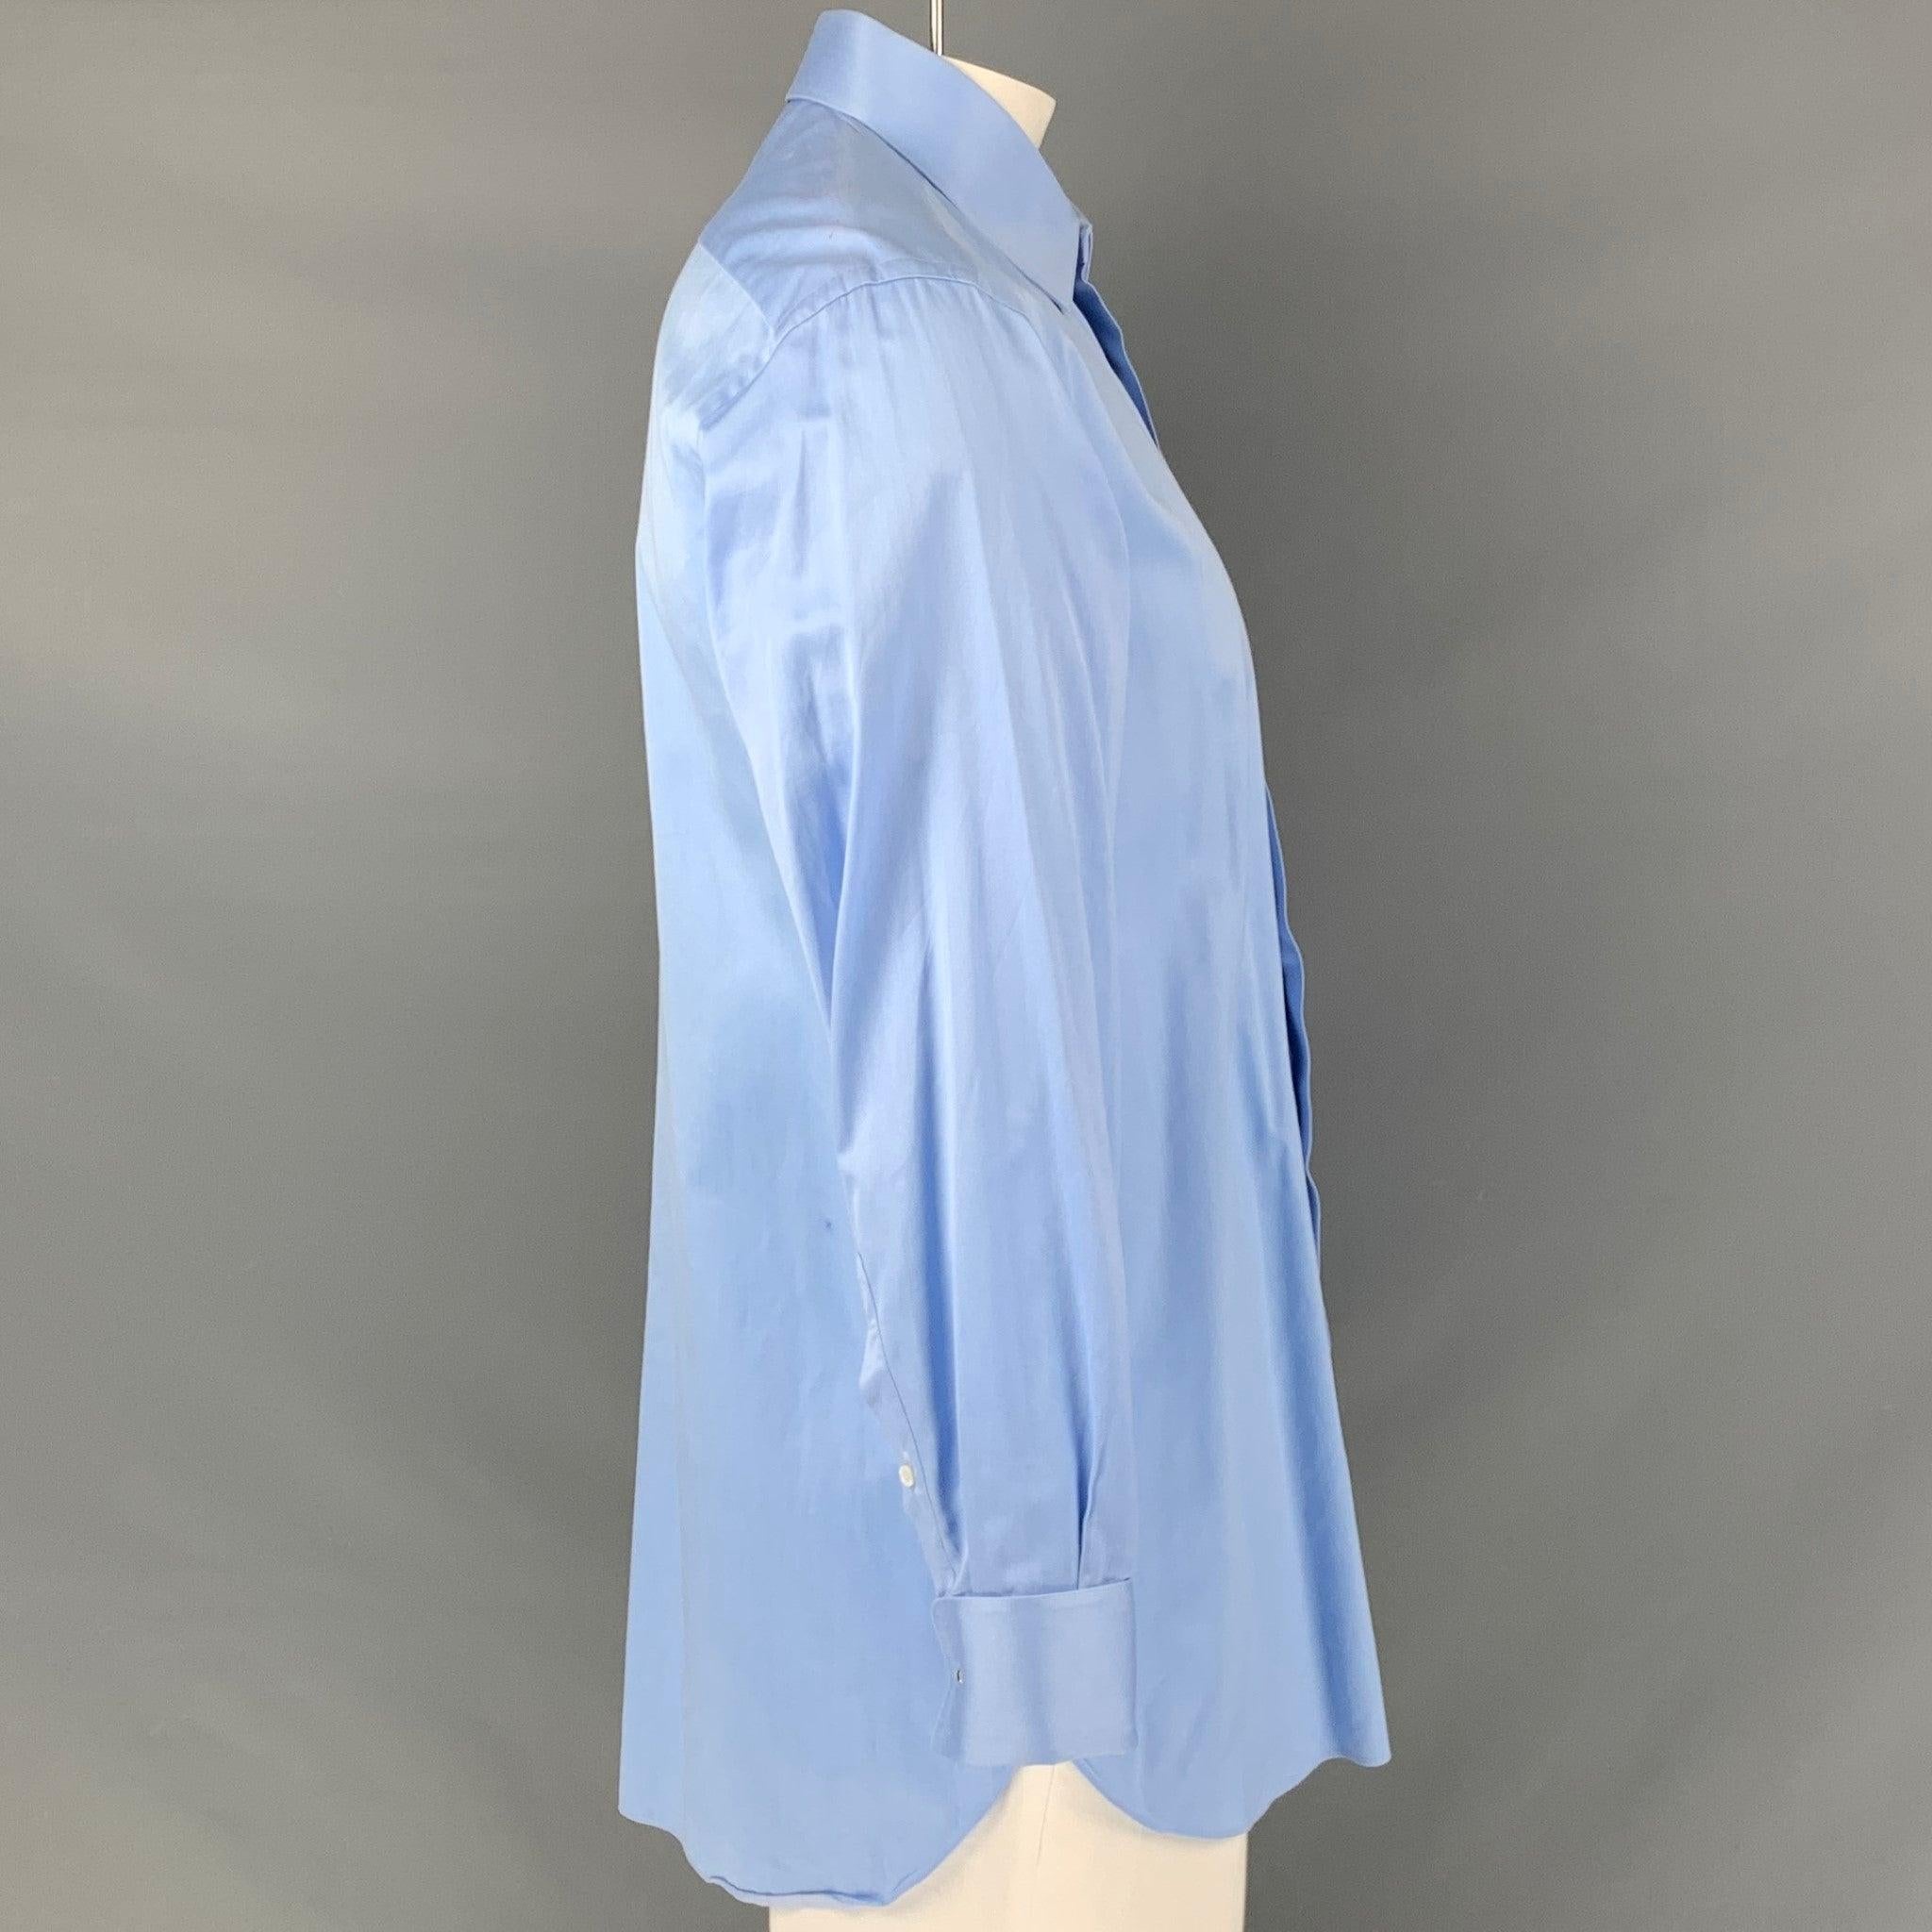 BRIONI long sleeve shirt comes in a light blue cotton fabric featuring a spread collar, french cuff, and a button down closure. Made in Italy.Very Good Pre-Owned Condition. Minor marks at right shoulder. 

Marked:   16 1/2 - L 

Measurements: 
